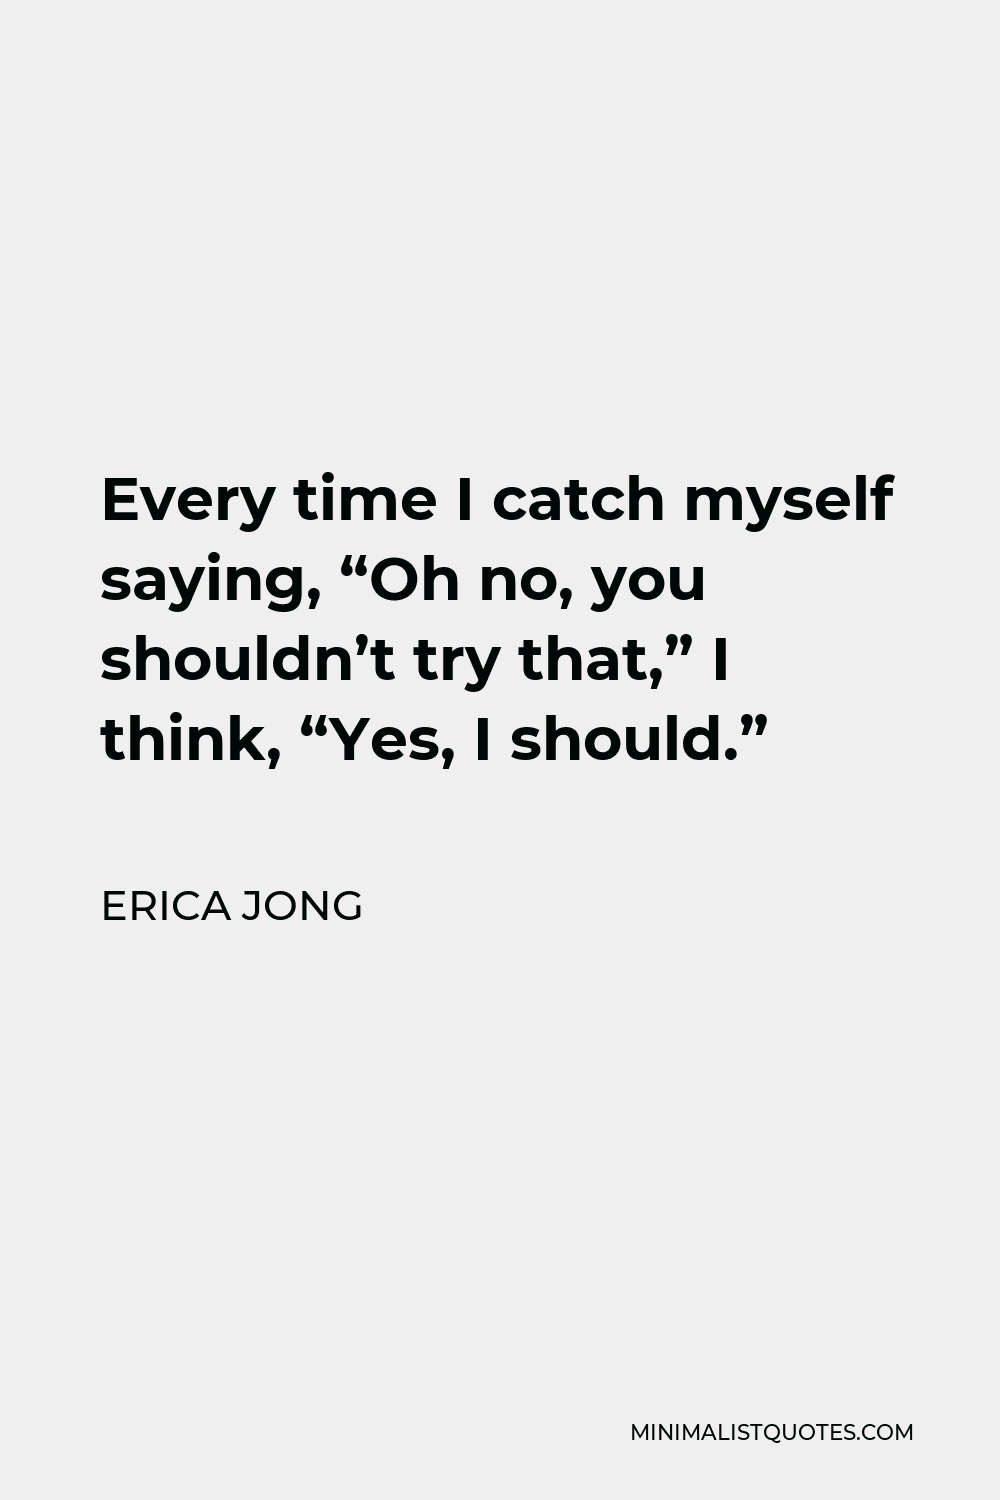 Erica Jong Quote - Every time I catch myself saying, “Oh no, you shouldn’t try that,” I think, “Yes, I should.”